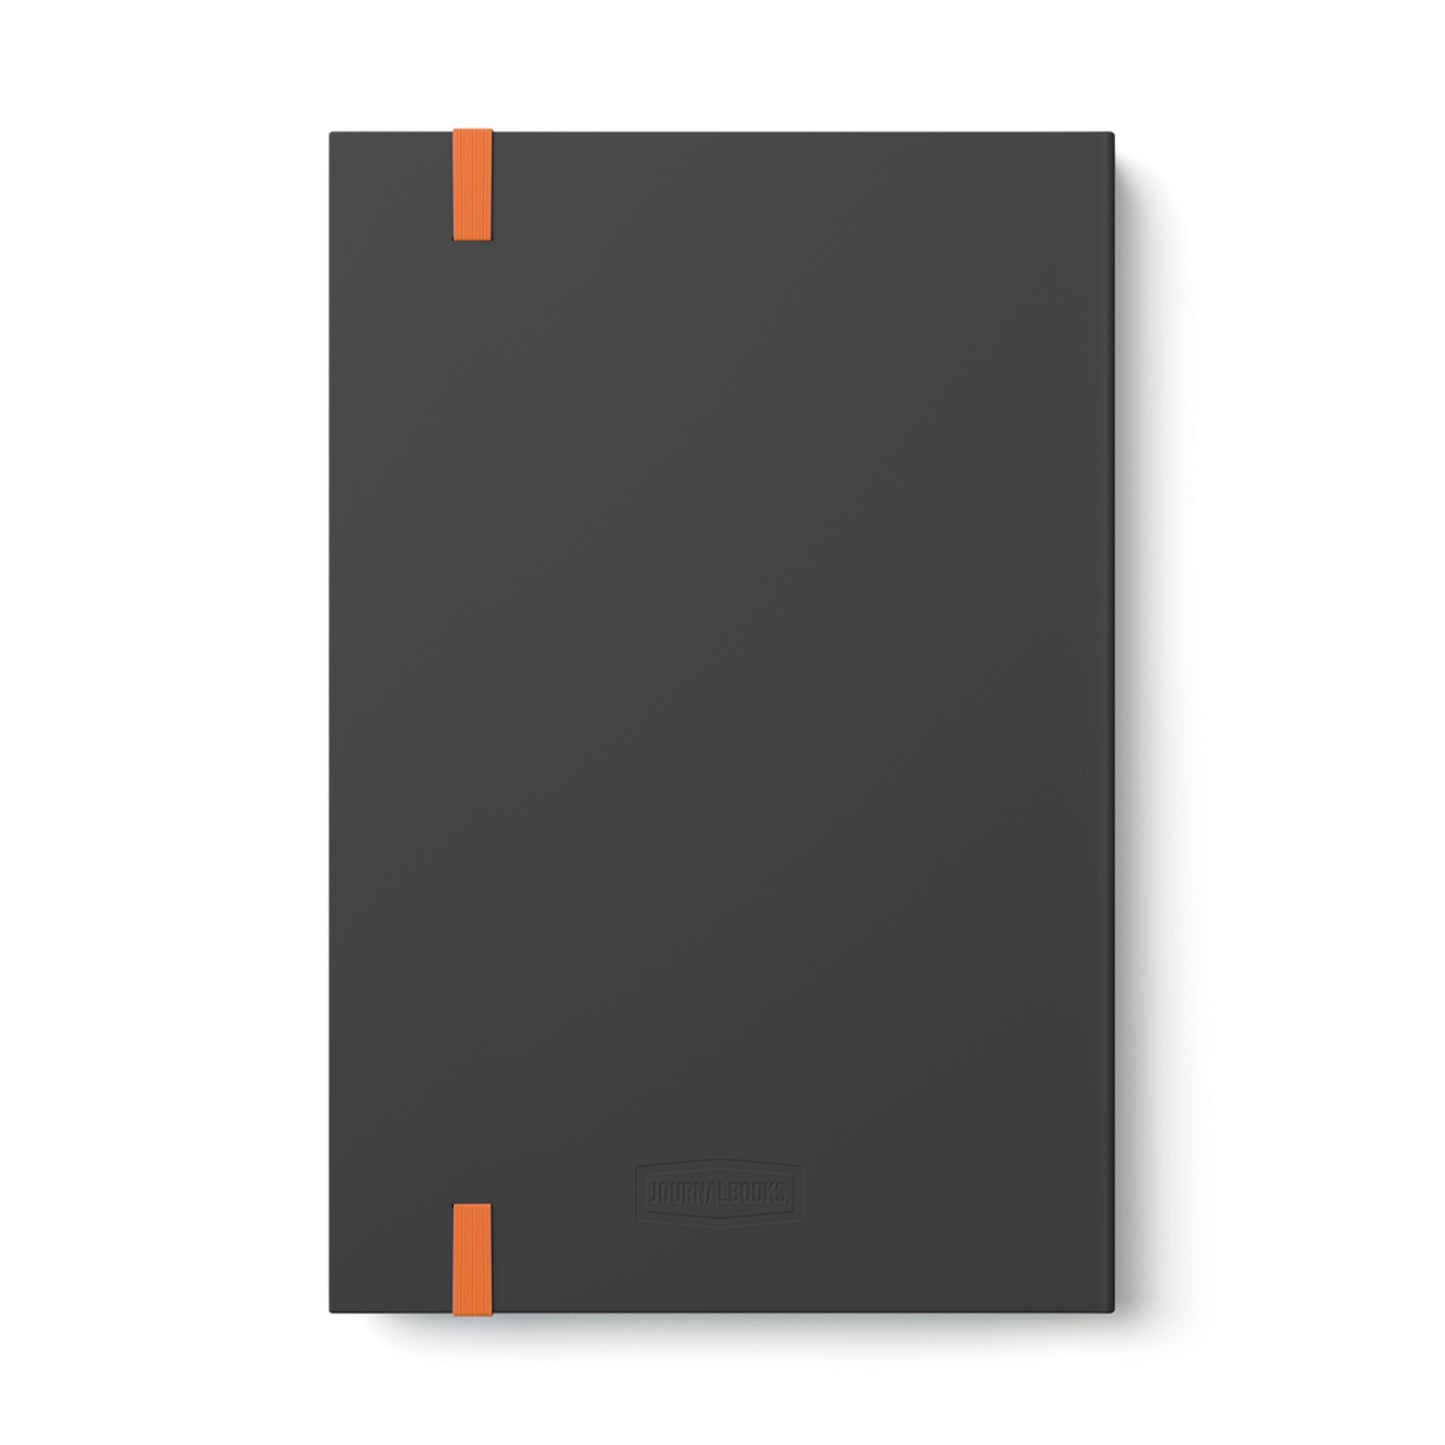 Sober By Choice - Contrast Notebook - Ruled